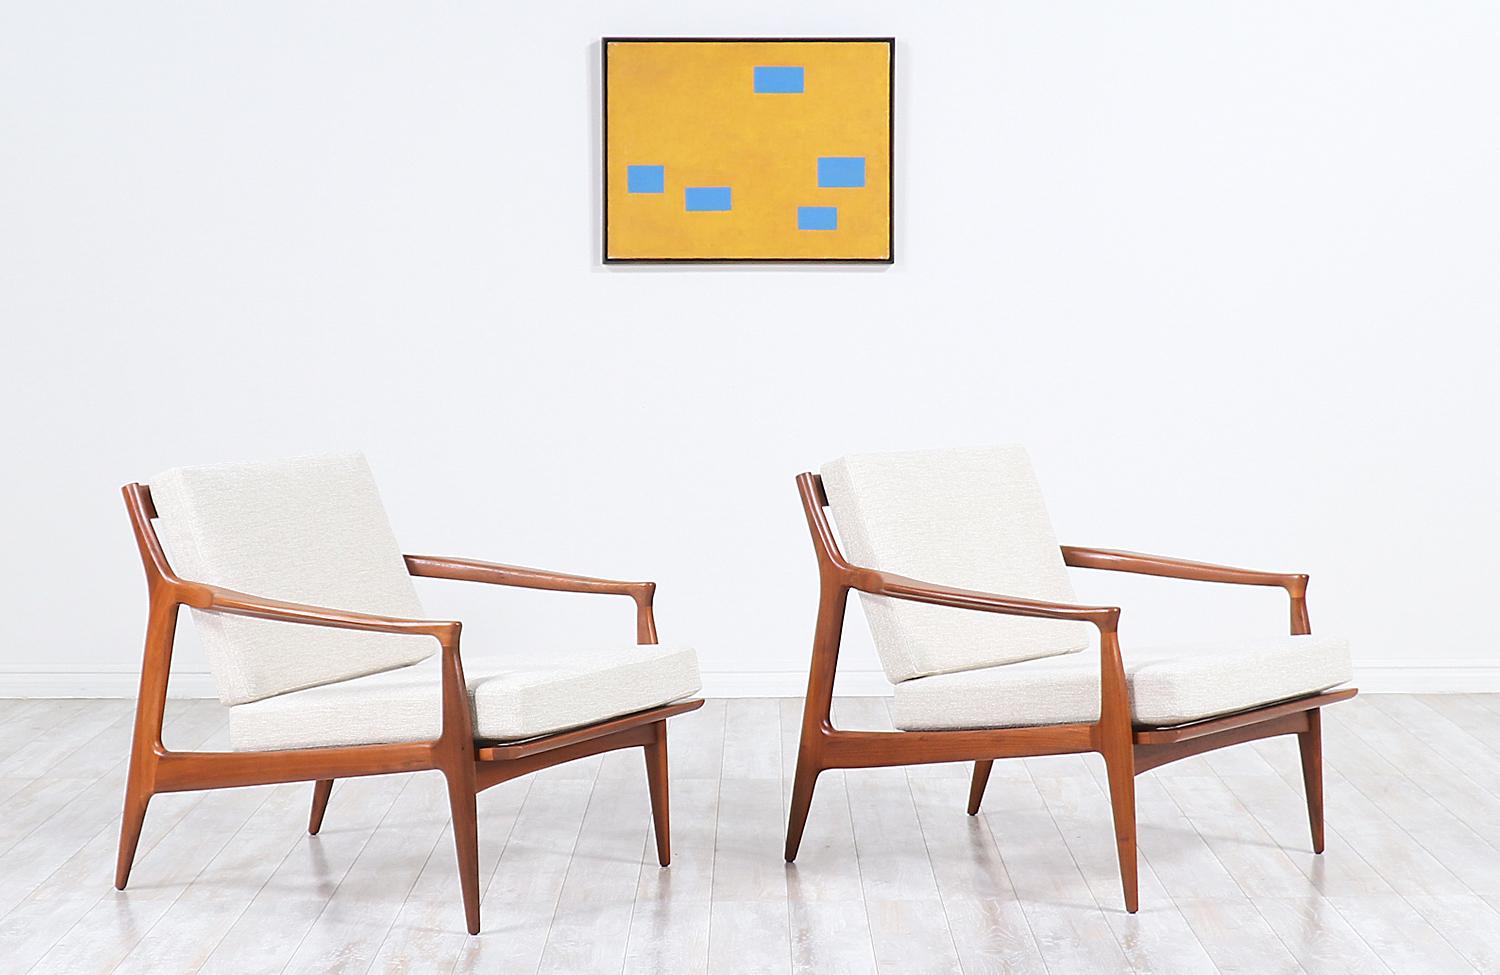 Stylish lounge chairs designed by American architect and designer Milo Baughman in collaboration with Thayer Coggin, who operated in the city of High Point, NC in the 1950s. These rare lounge chairs feature sculptural walnut wood frames that